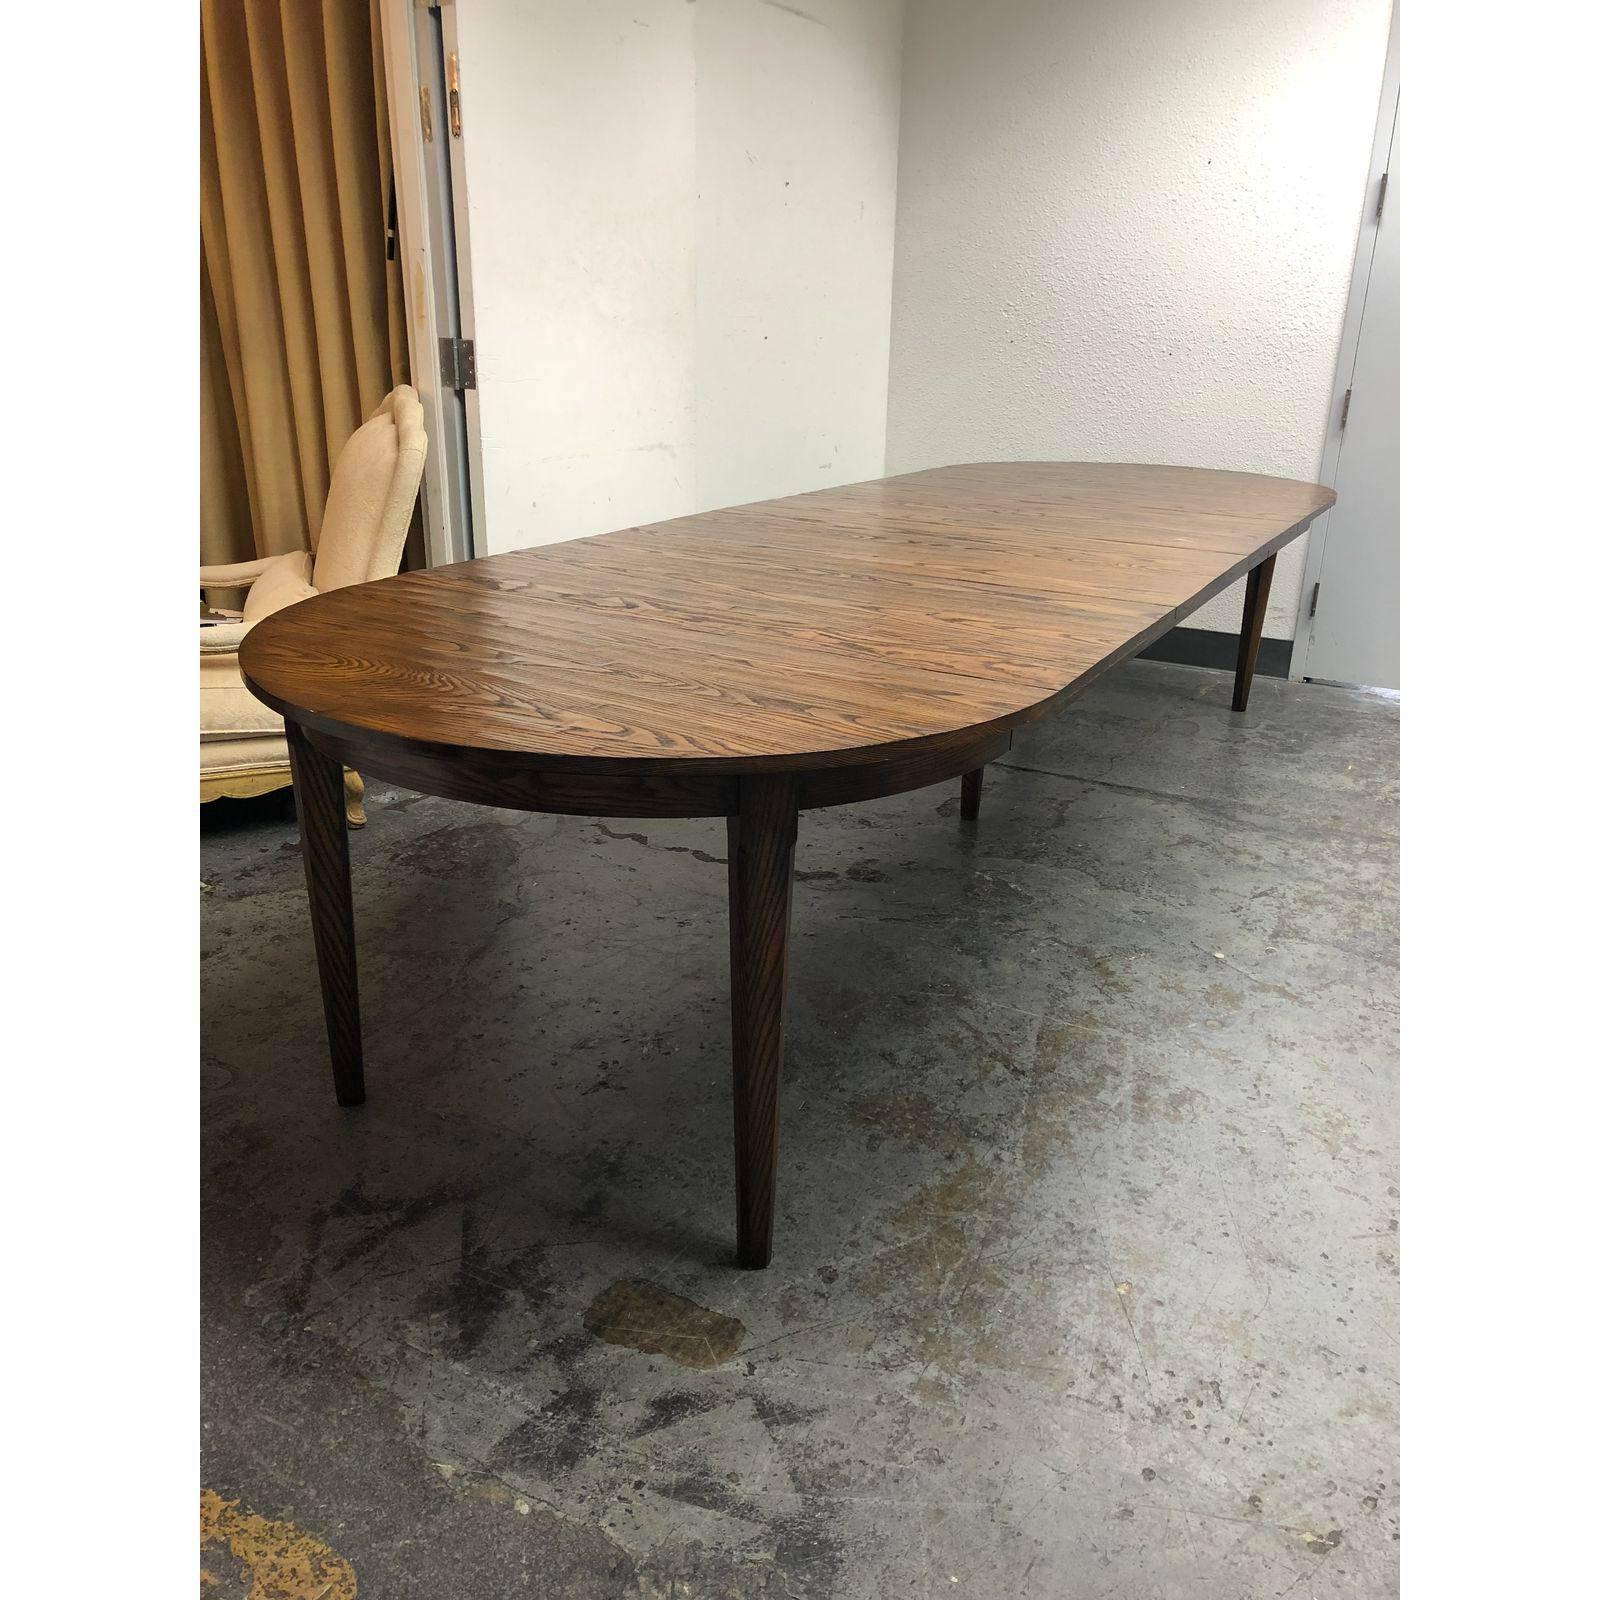 A Yorkshire House dining table. This gorgeous solid oak table was handcrafted in Vermont. The table has the capability to grow from a 48 inch round to 114 inch oval. The table and the leaves have stunning hand scraped finish which gives the table